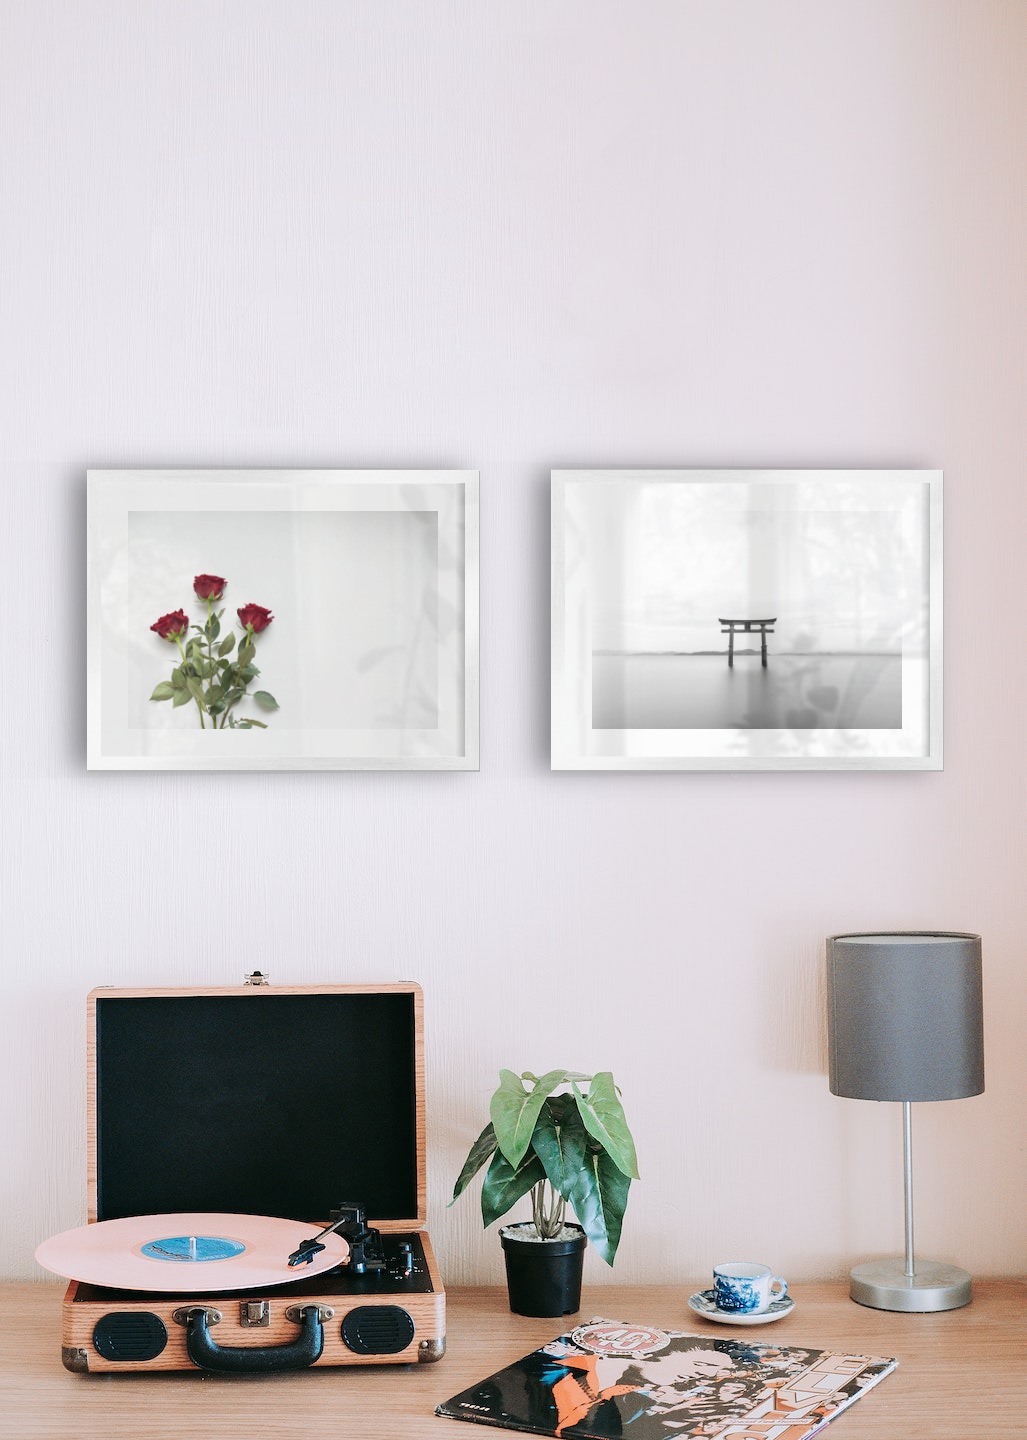 Gallery wall with picture frames in silver in sizes 30x40 with prints "Red roses" and "Pillars in the water"